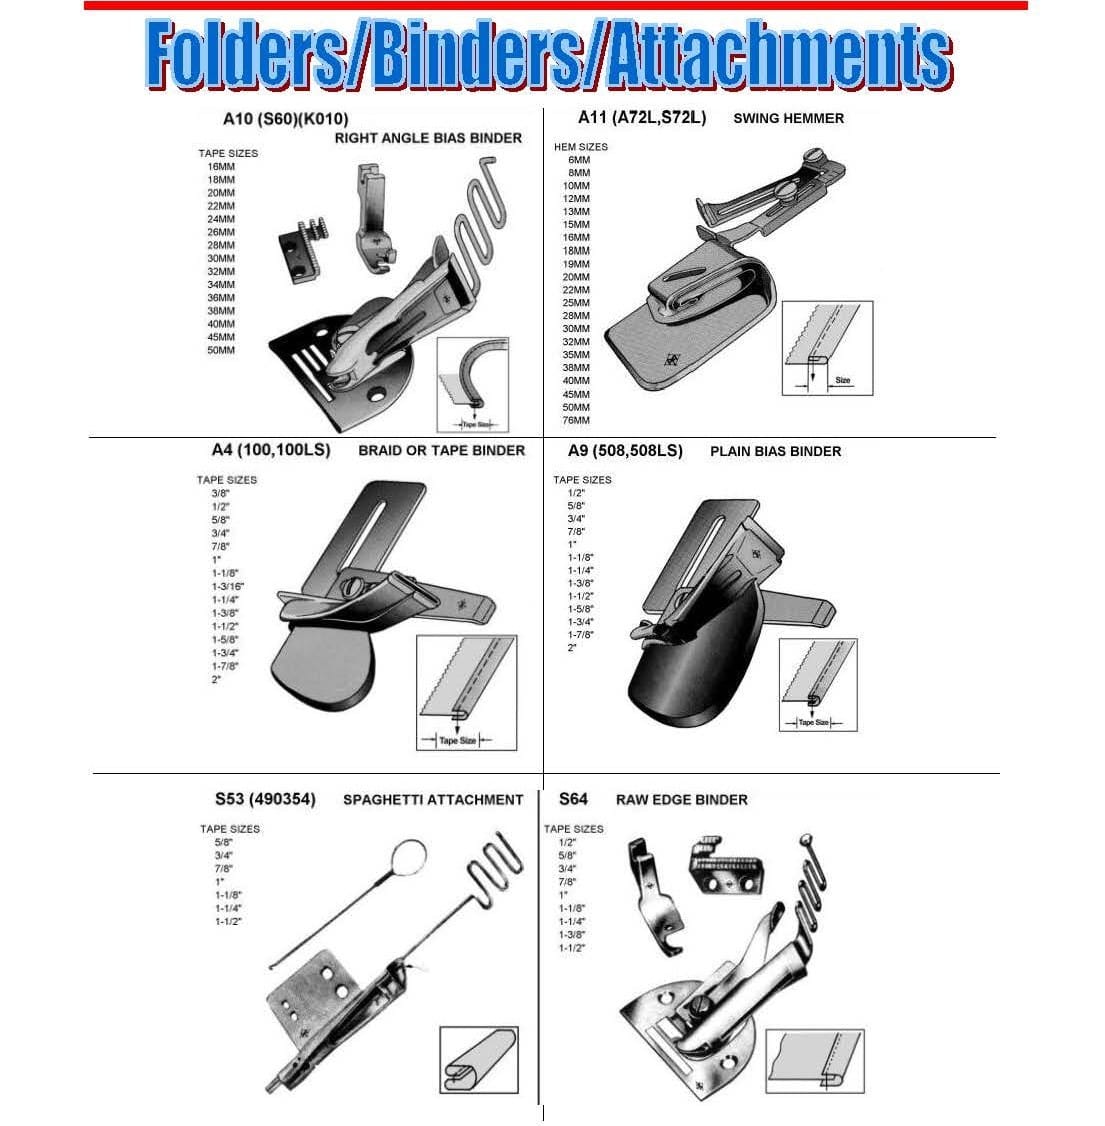 HEMMERS, BINDERS, FOLDERS, and ATTACHMENTS